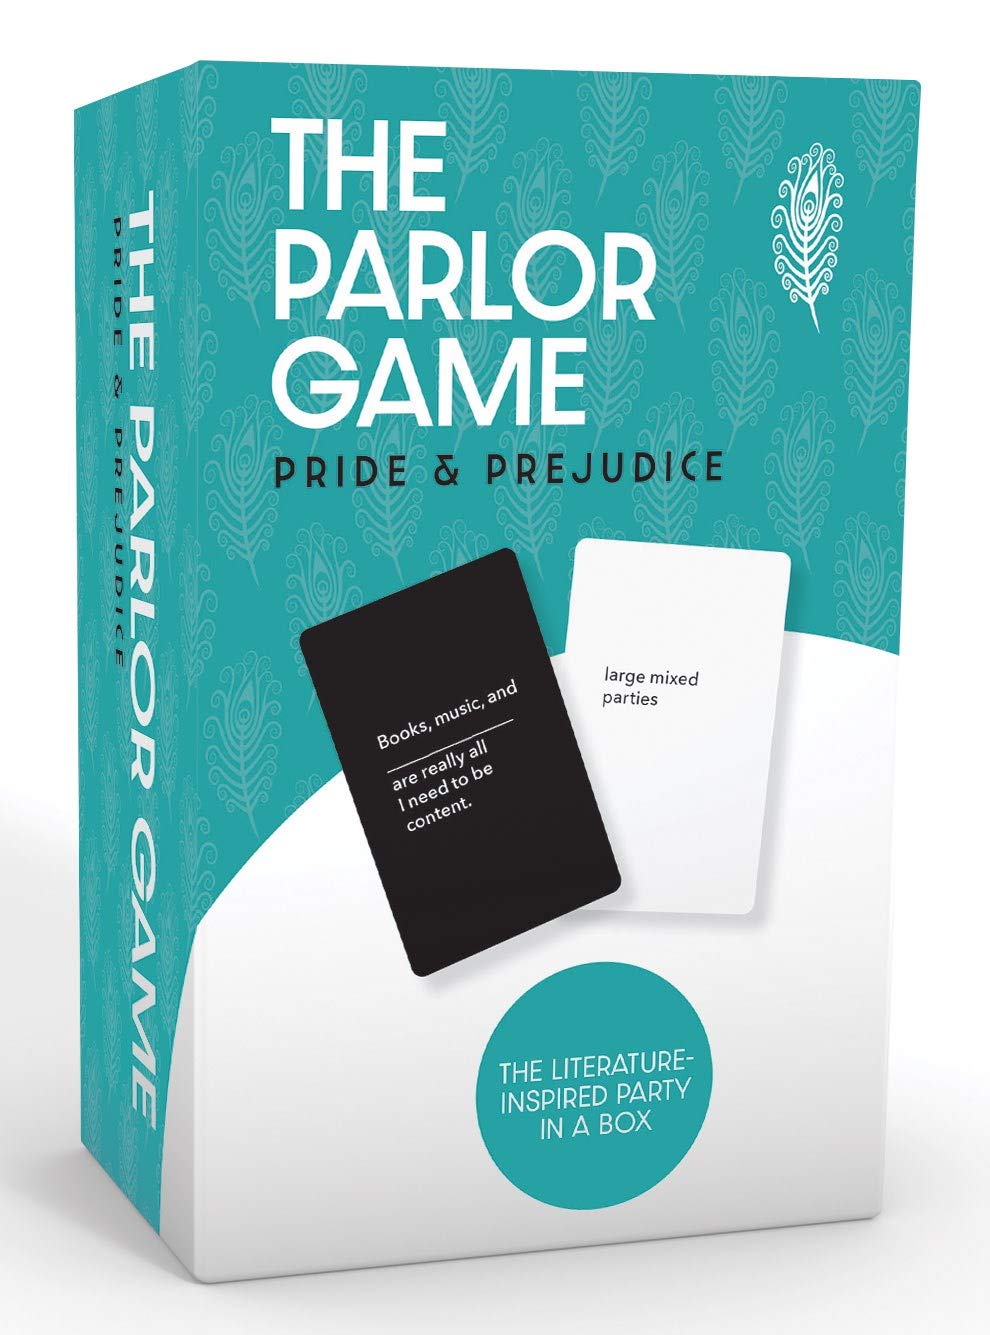 The Parlor Game: Pride & Prejudice (A Literature-Inspired Party in a Box)